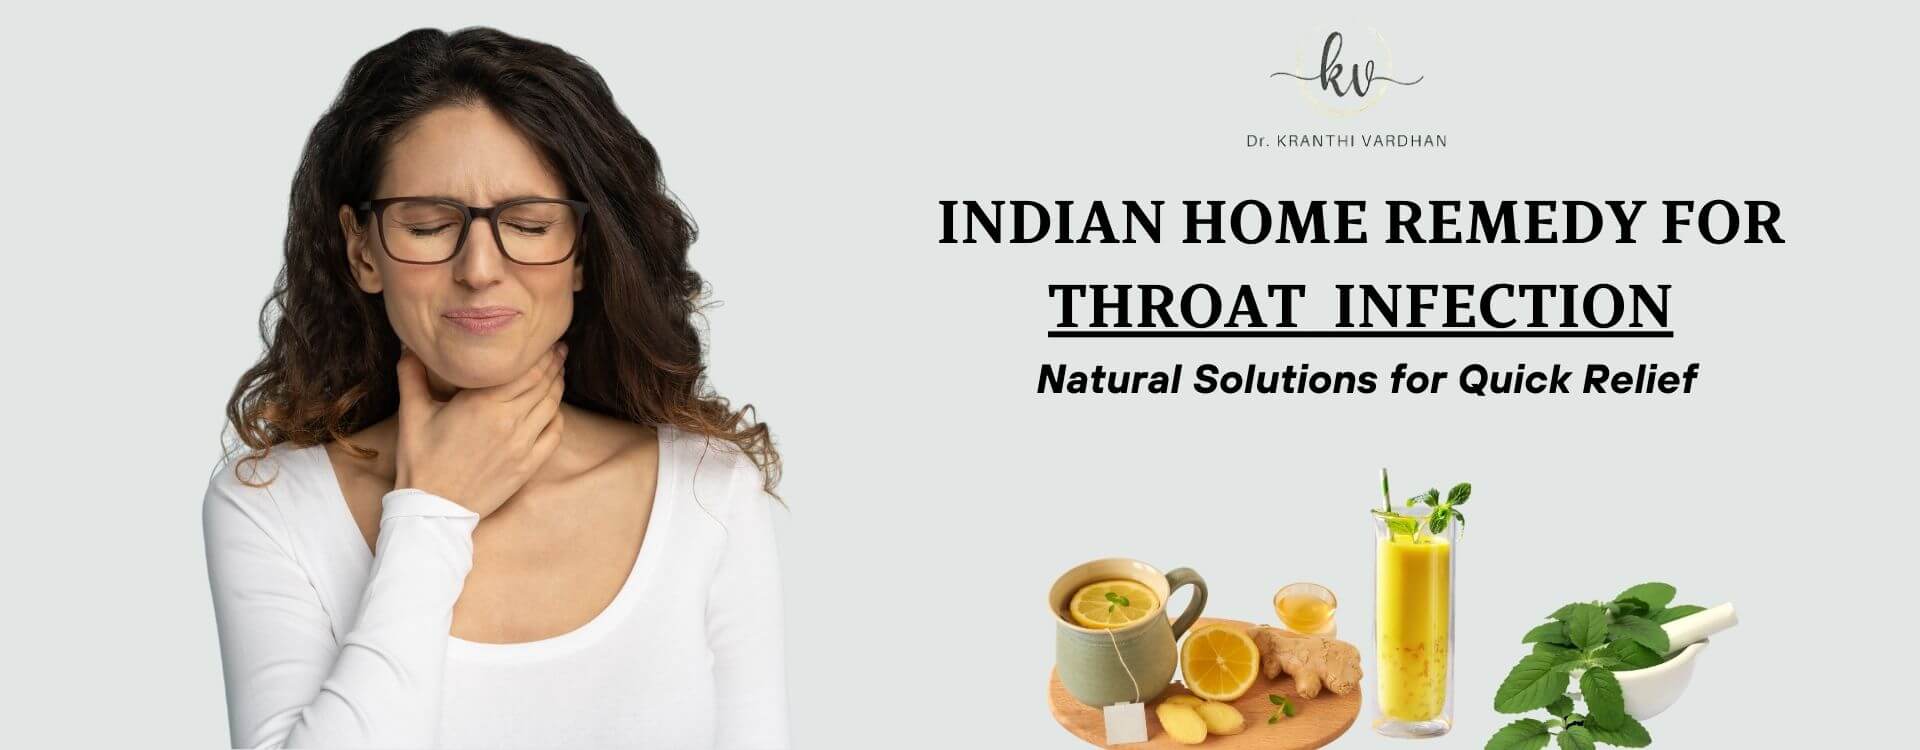 Indian Home Remedy for Throat Infection: Natural Solutions for Quick Relief